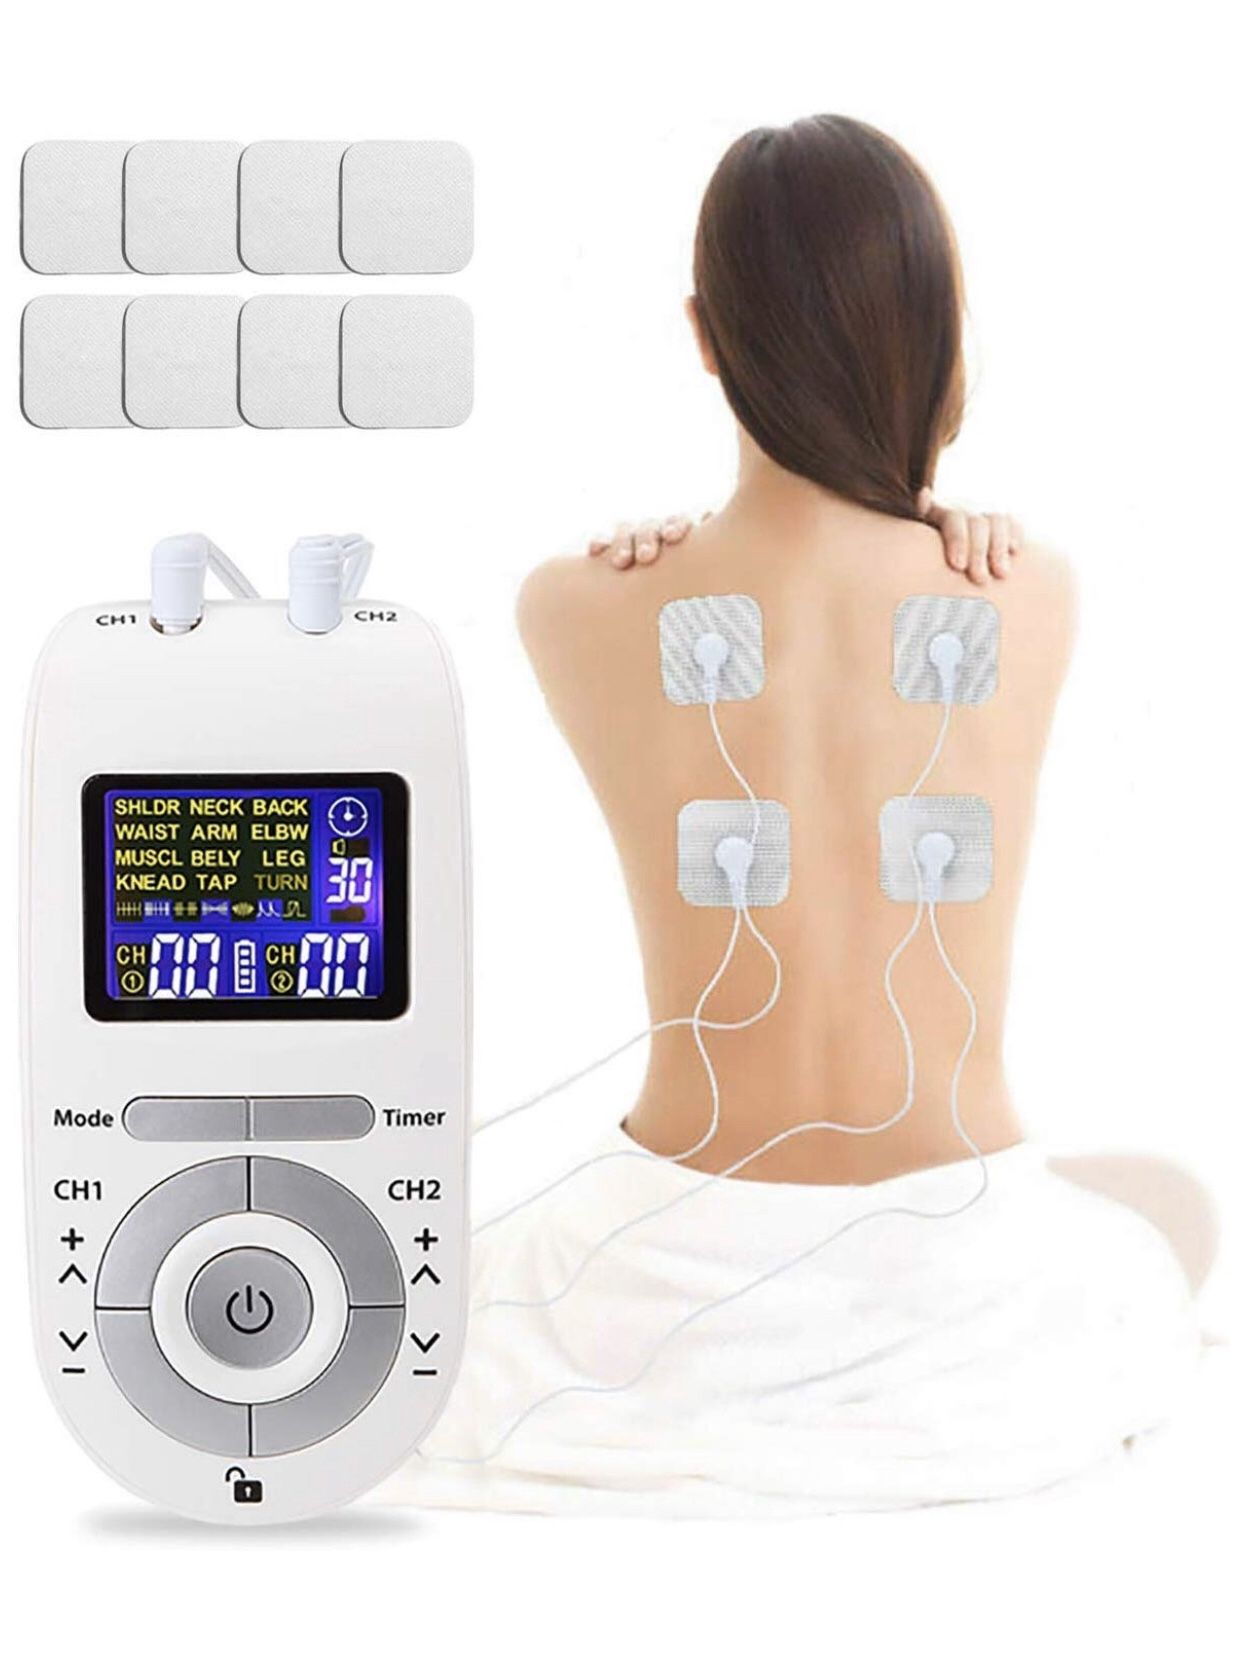 Dual Channel TENS Unit Muscle Stimulator,12 Modes 8 Electrode Pads 40 Level Intensity Rechargeable, Tens Machine for Back, Neck, Arm, Leg & Knee